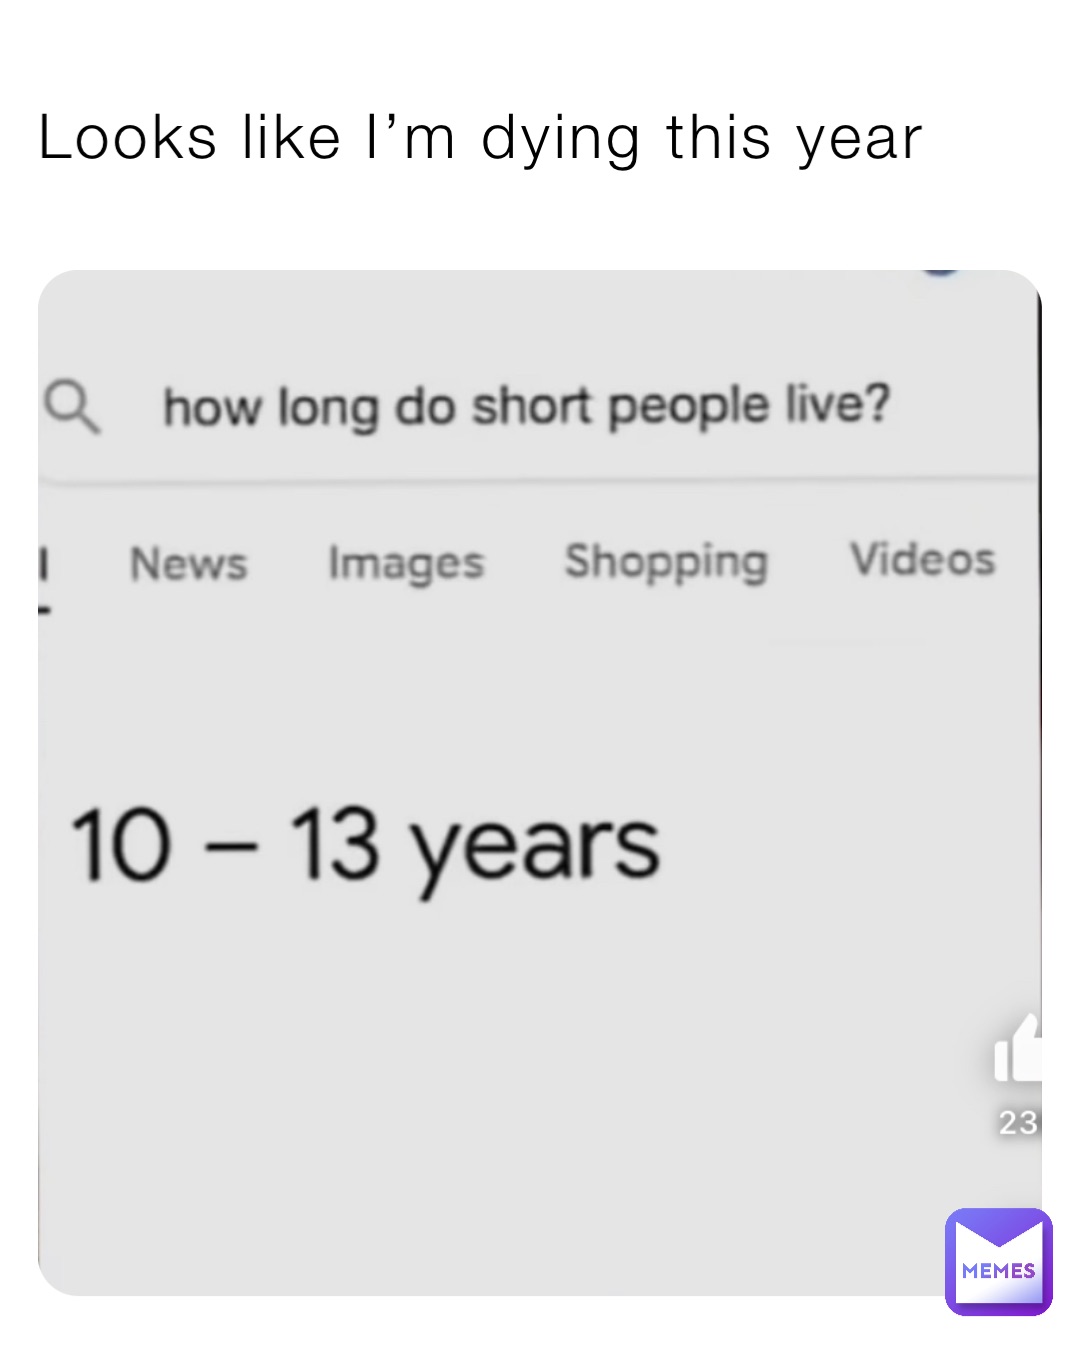 Looks like I’m dying this year